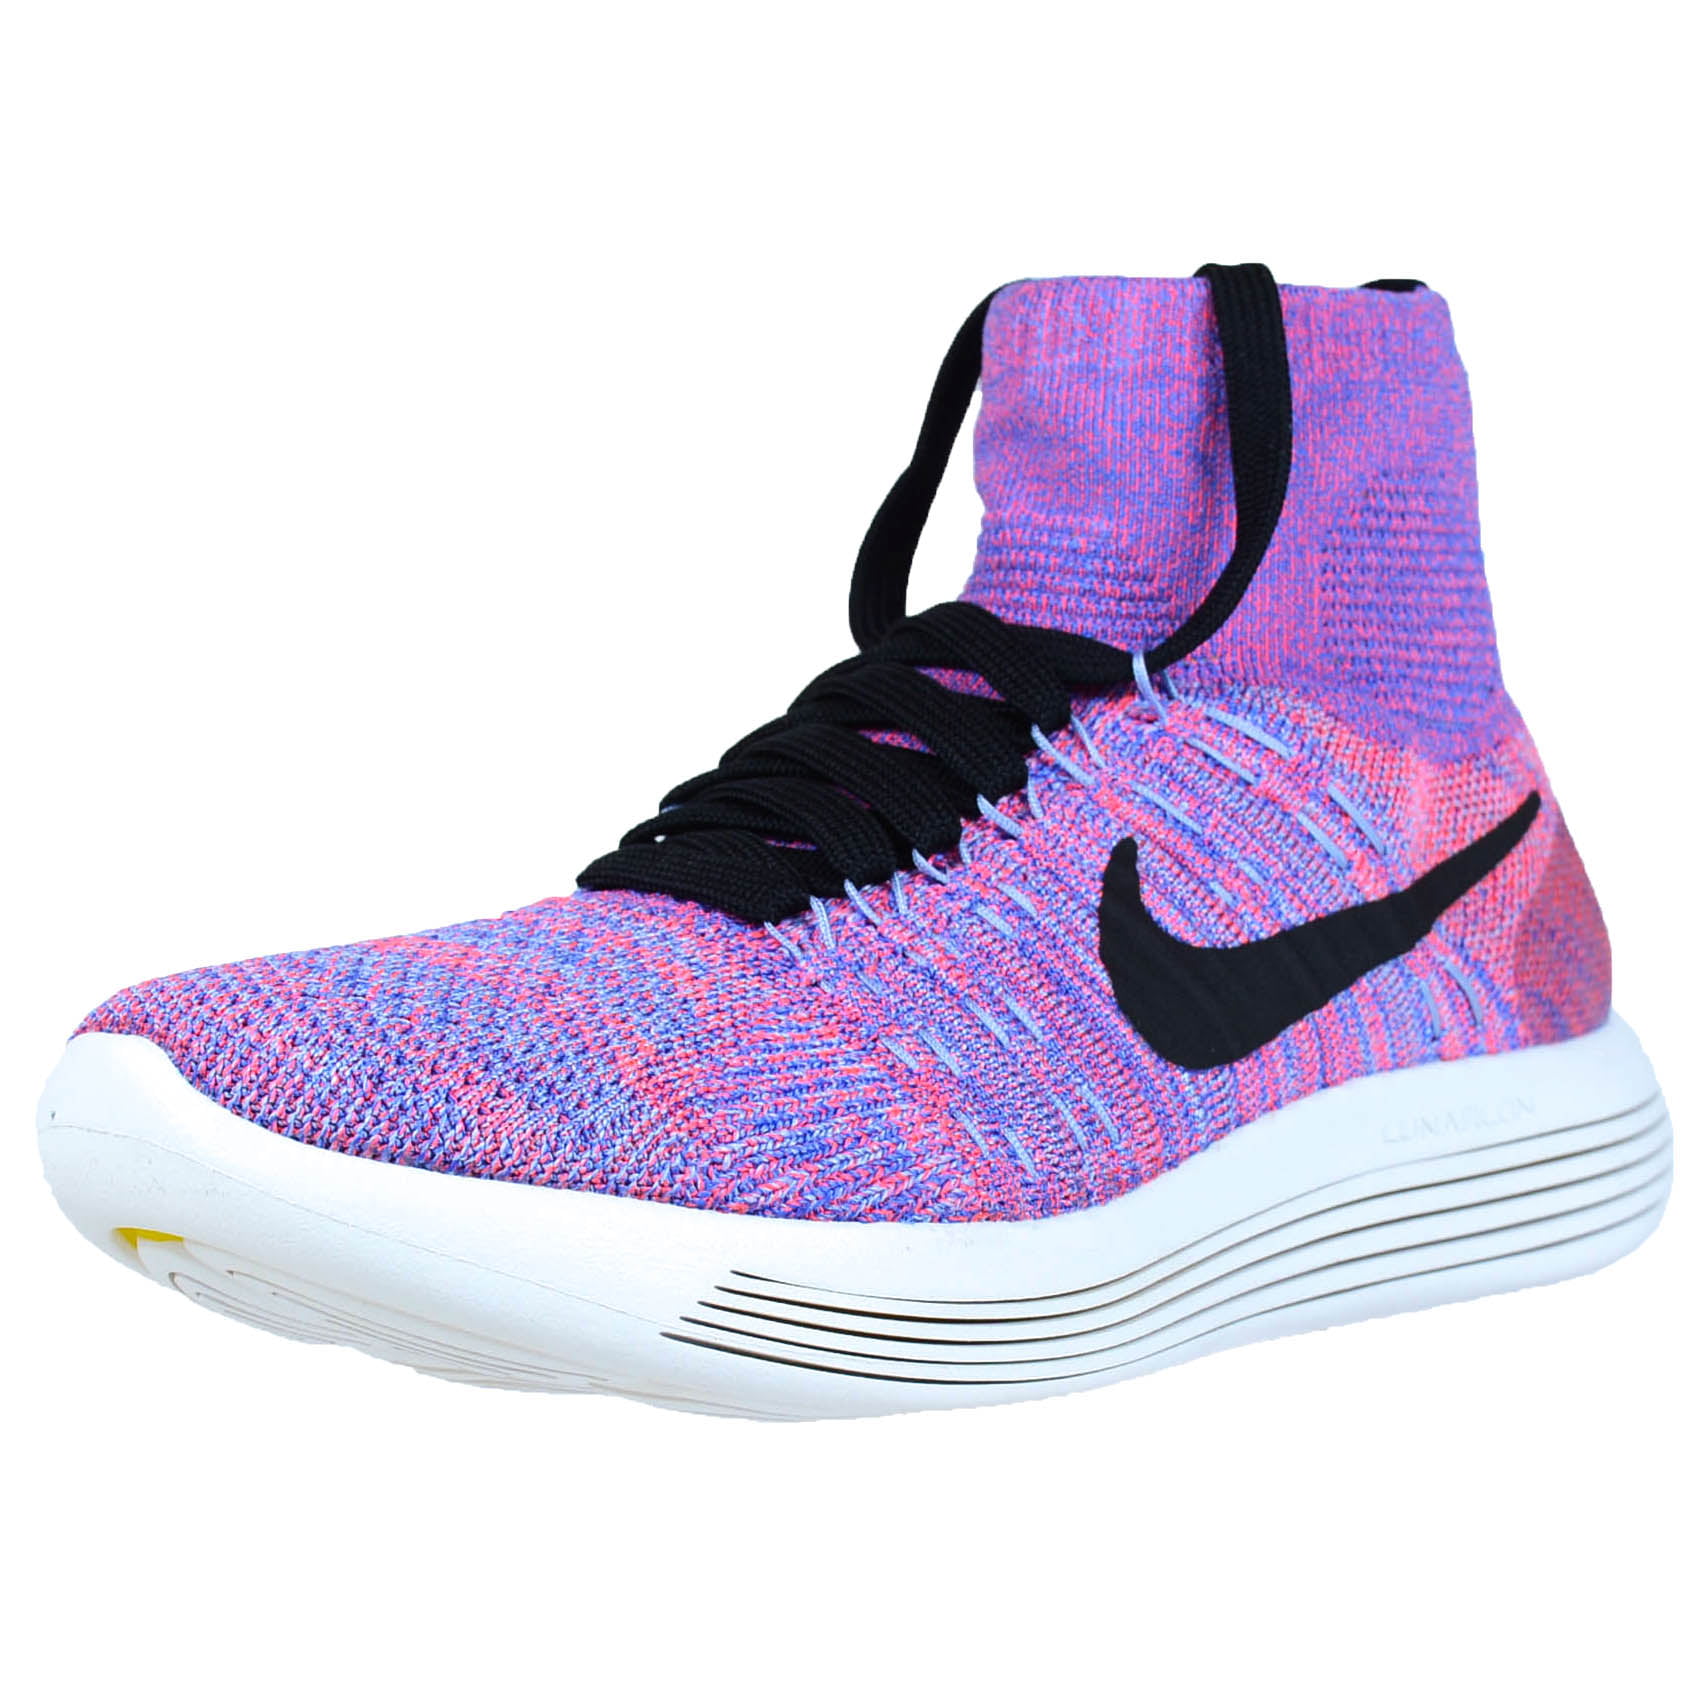 nike women's shoes pink and purple